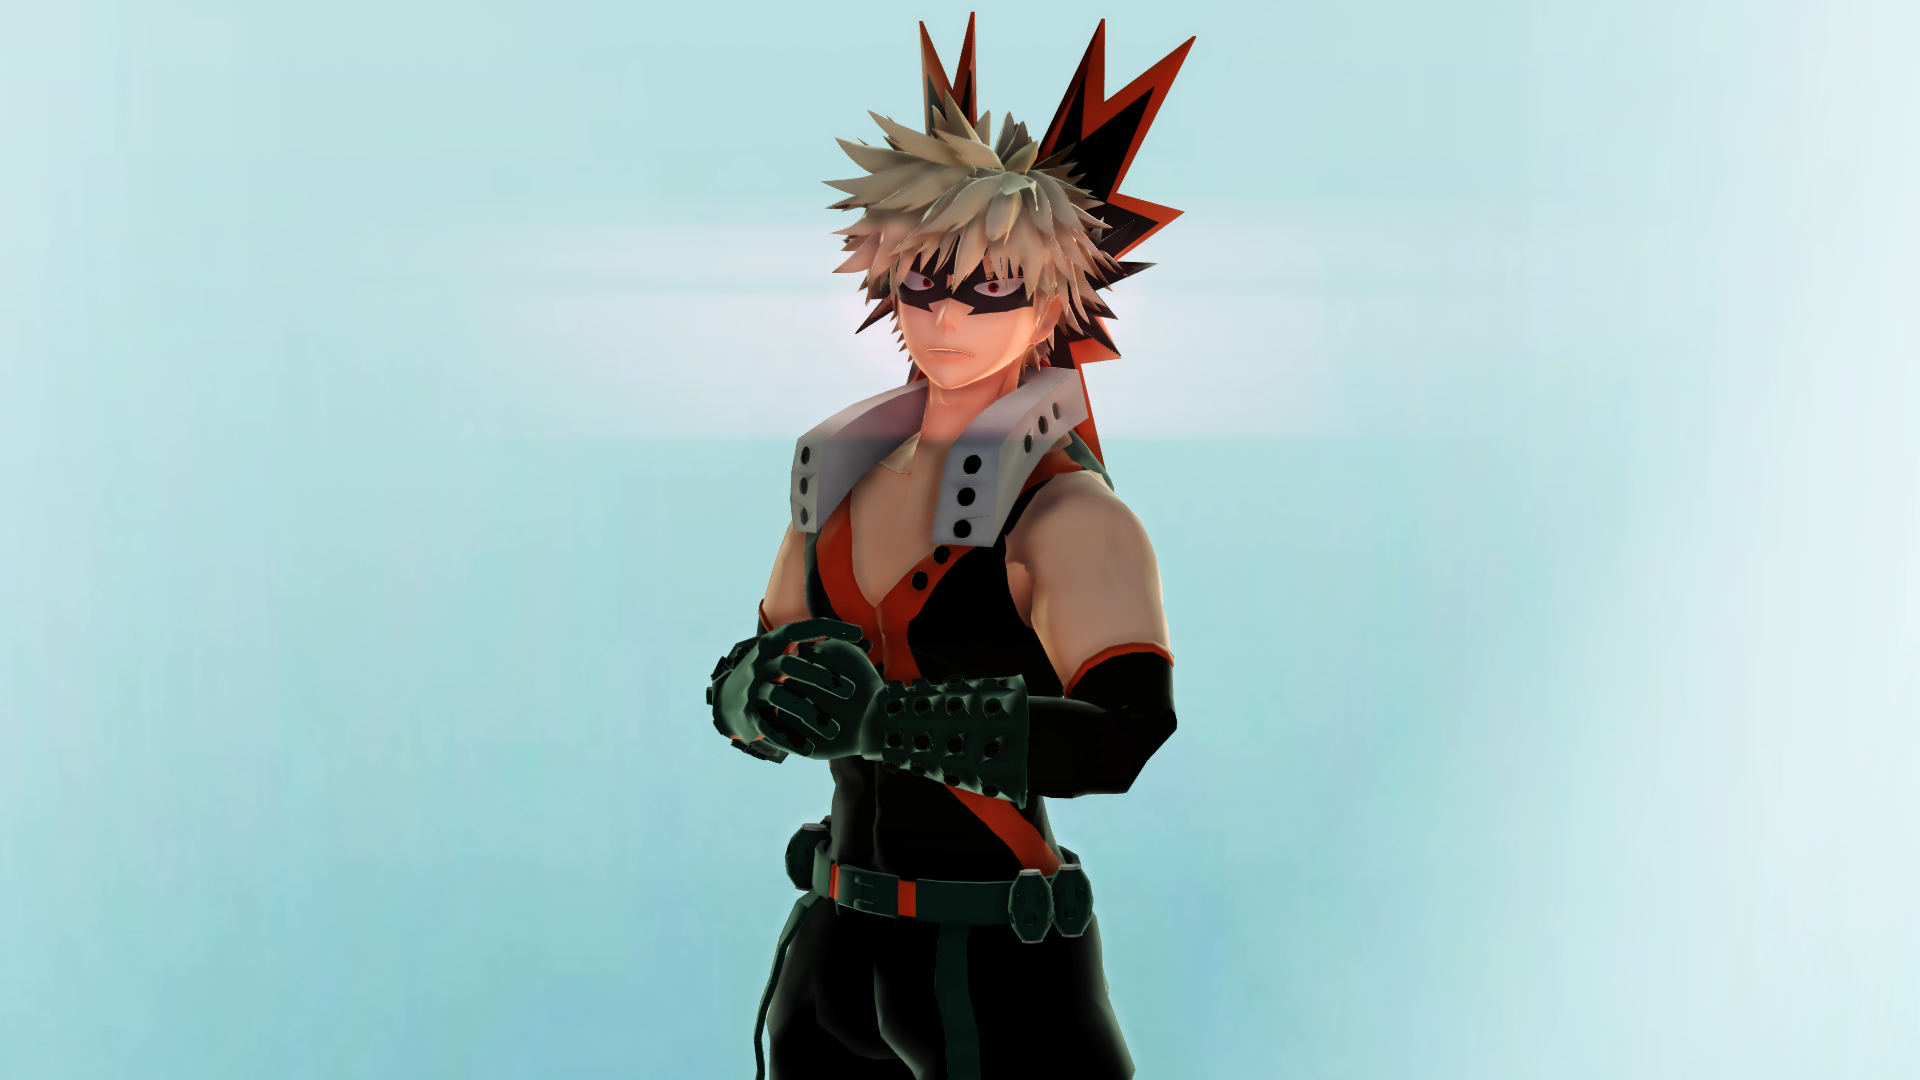 _aight_so_boom___by_stanthemmd-dbvgkb2.png